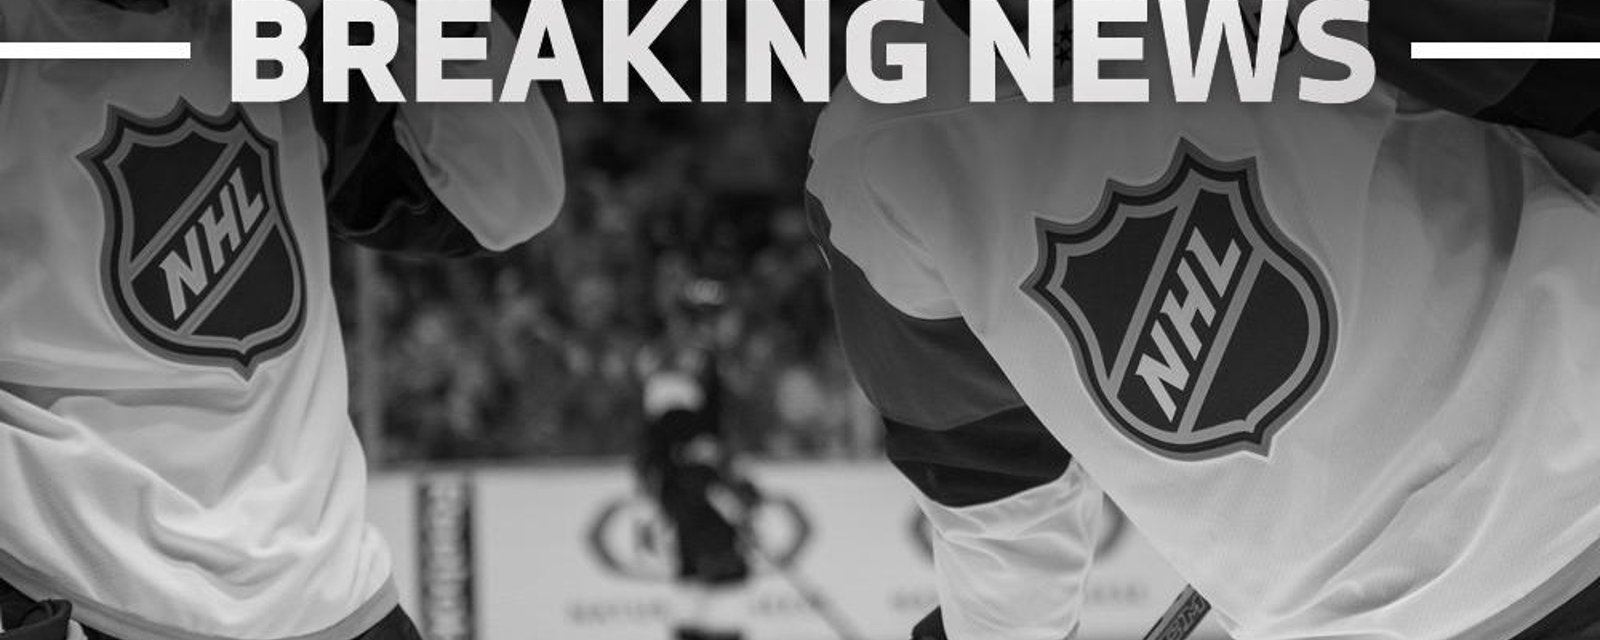 Breaking: The end of the road for one of the most hated men in the NHL?